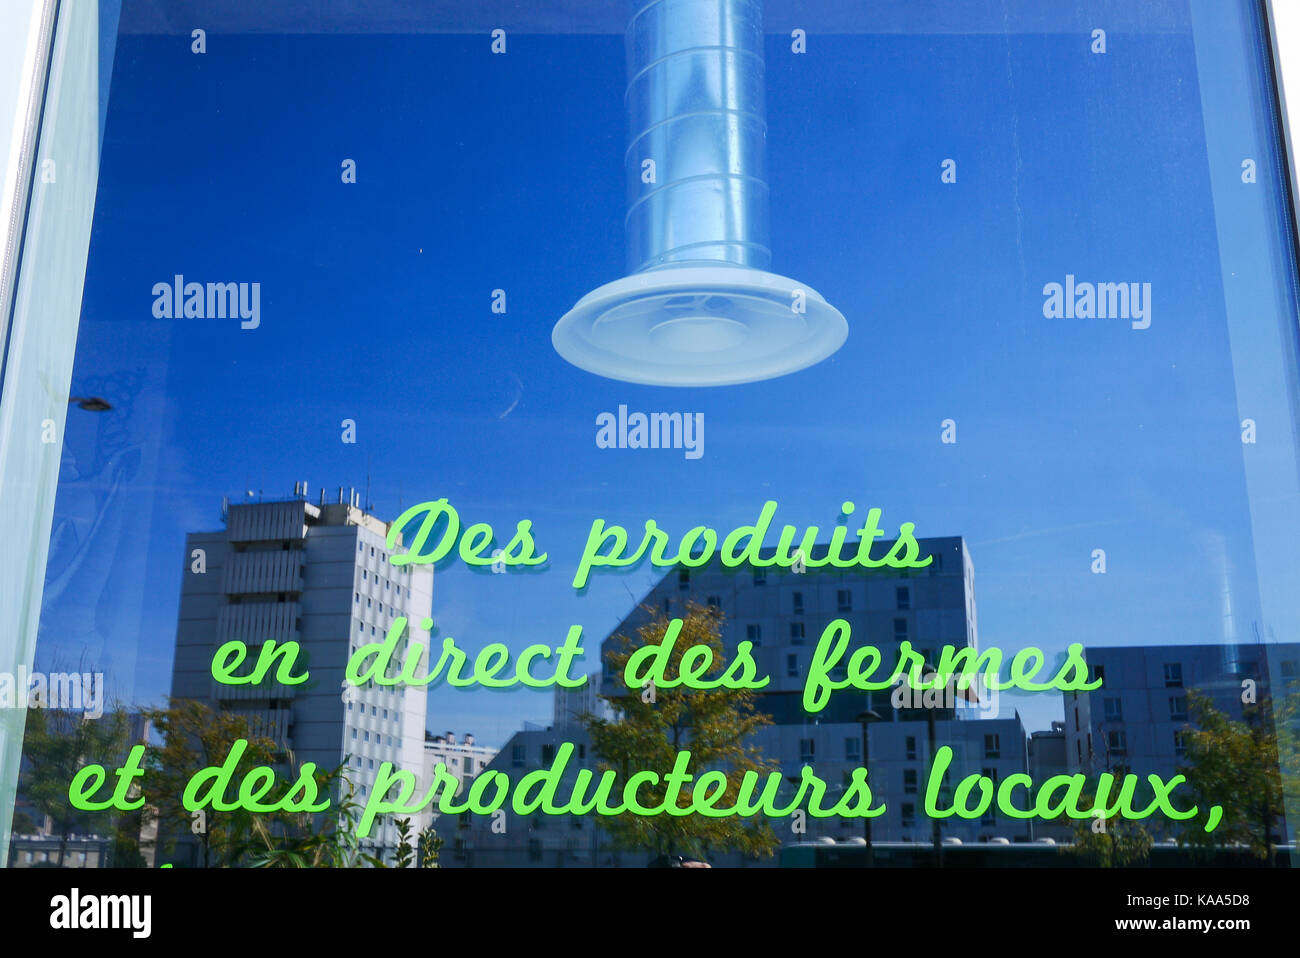 A cook promotes the use of products direct from farm, Paris, France Stock Photo